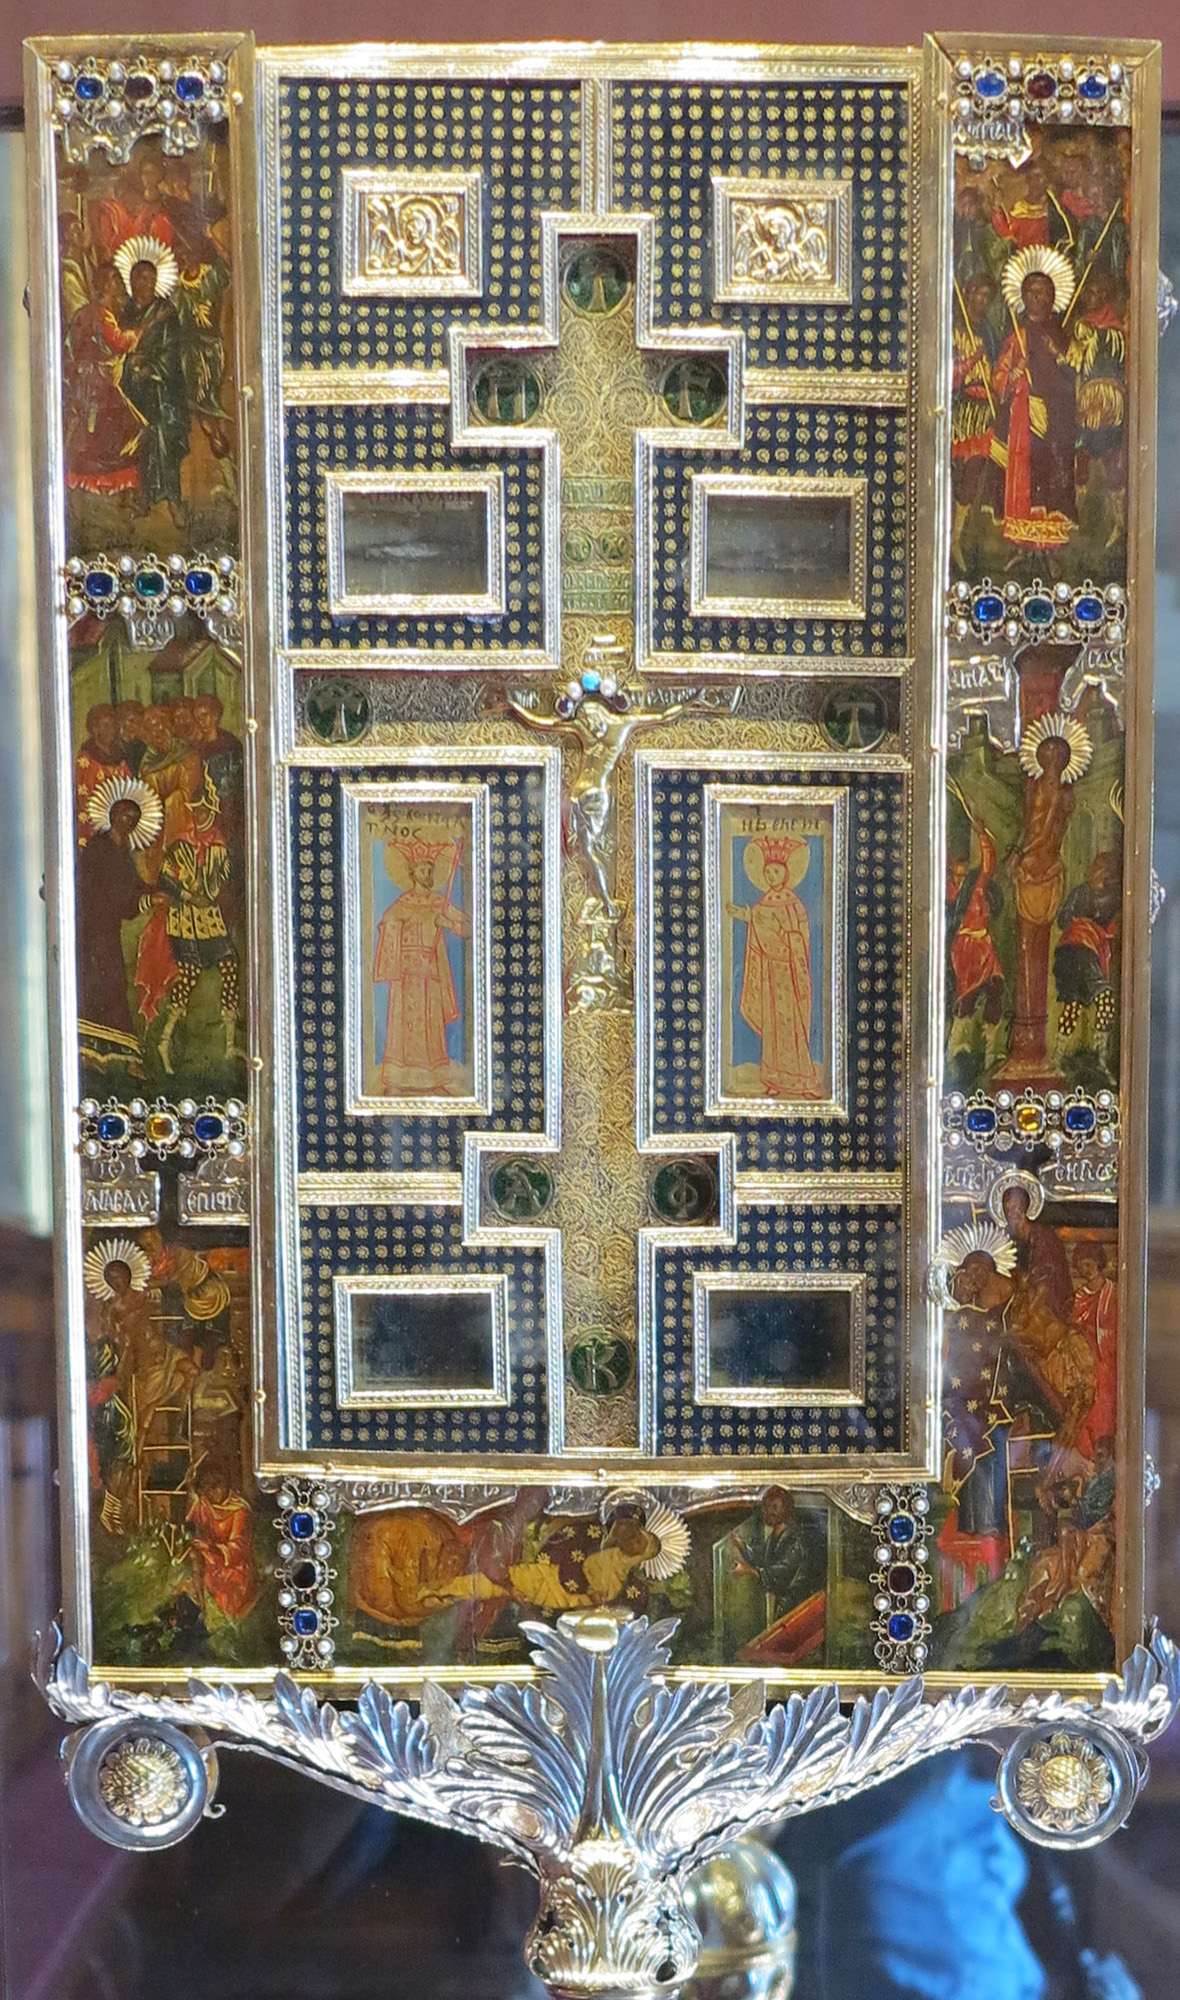 A painted reliquary with a metalwork cross.